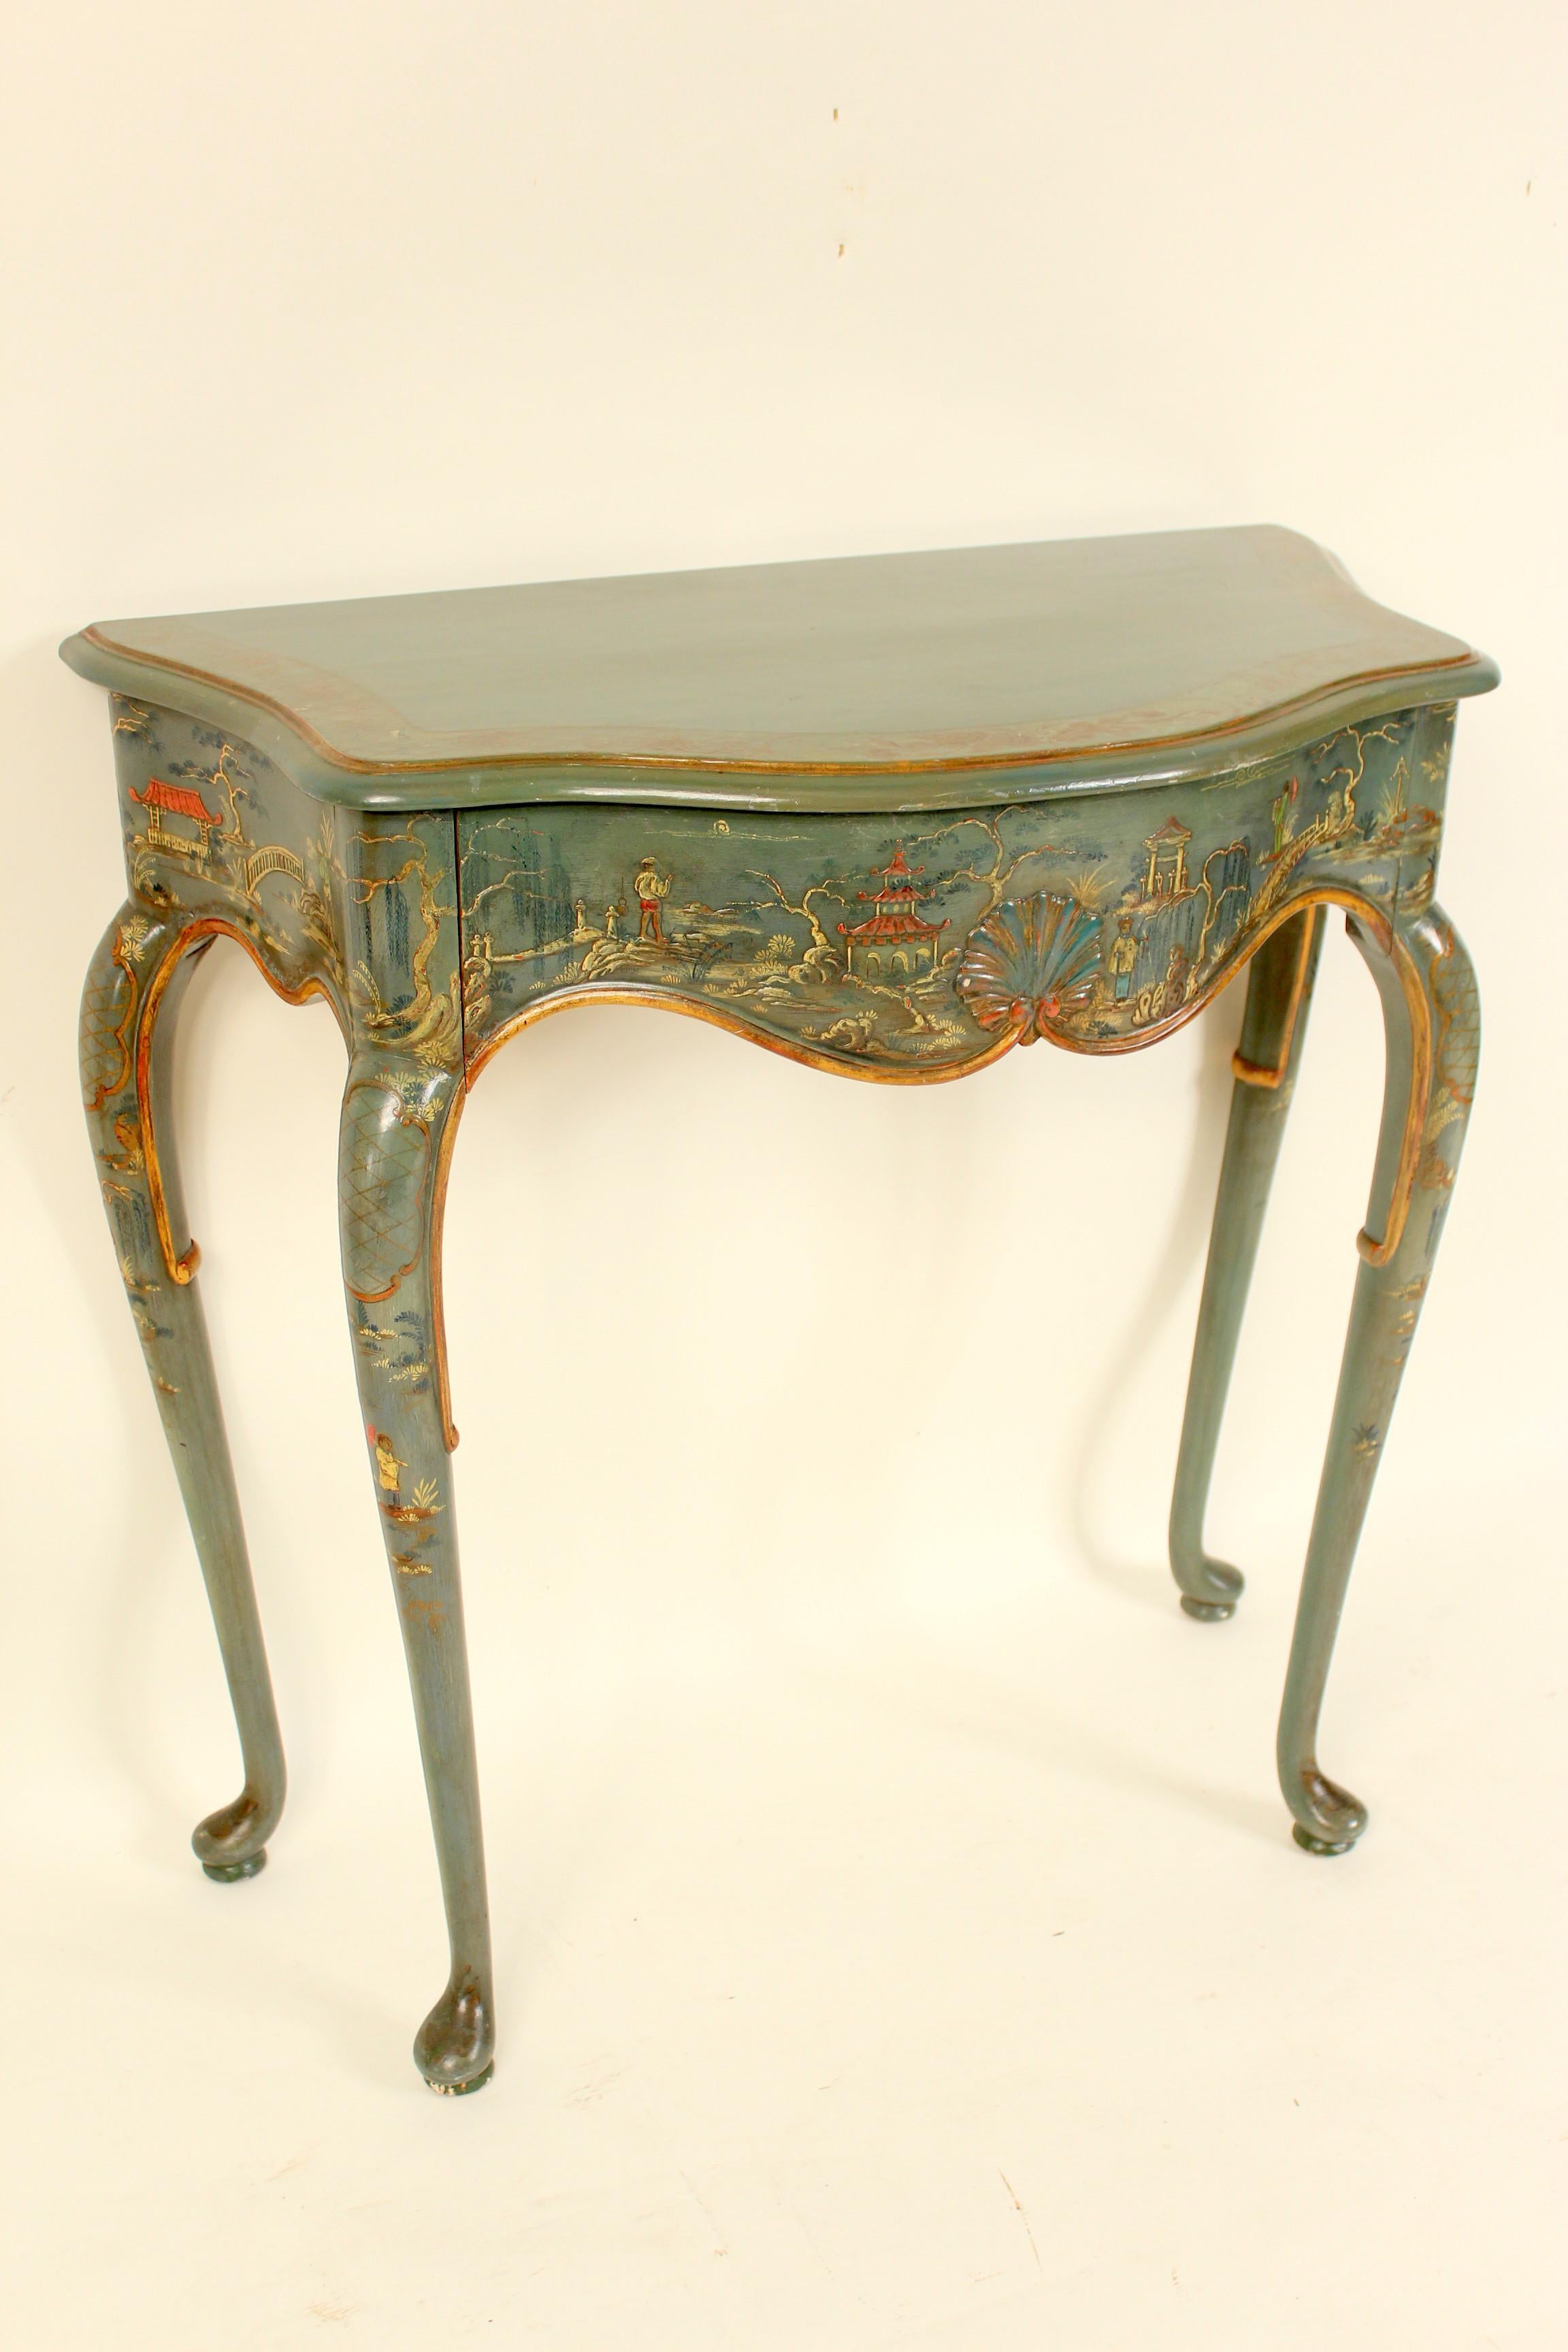 Queen Anne style chinoiserie decorated console and mirror, circa mid-20th century. Handmade dovetails on console drawer, nice quality raised chinoiserie decoration. Dimensions of console, height 34.25